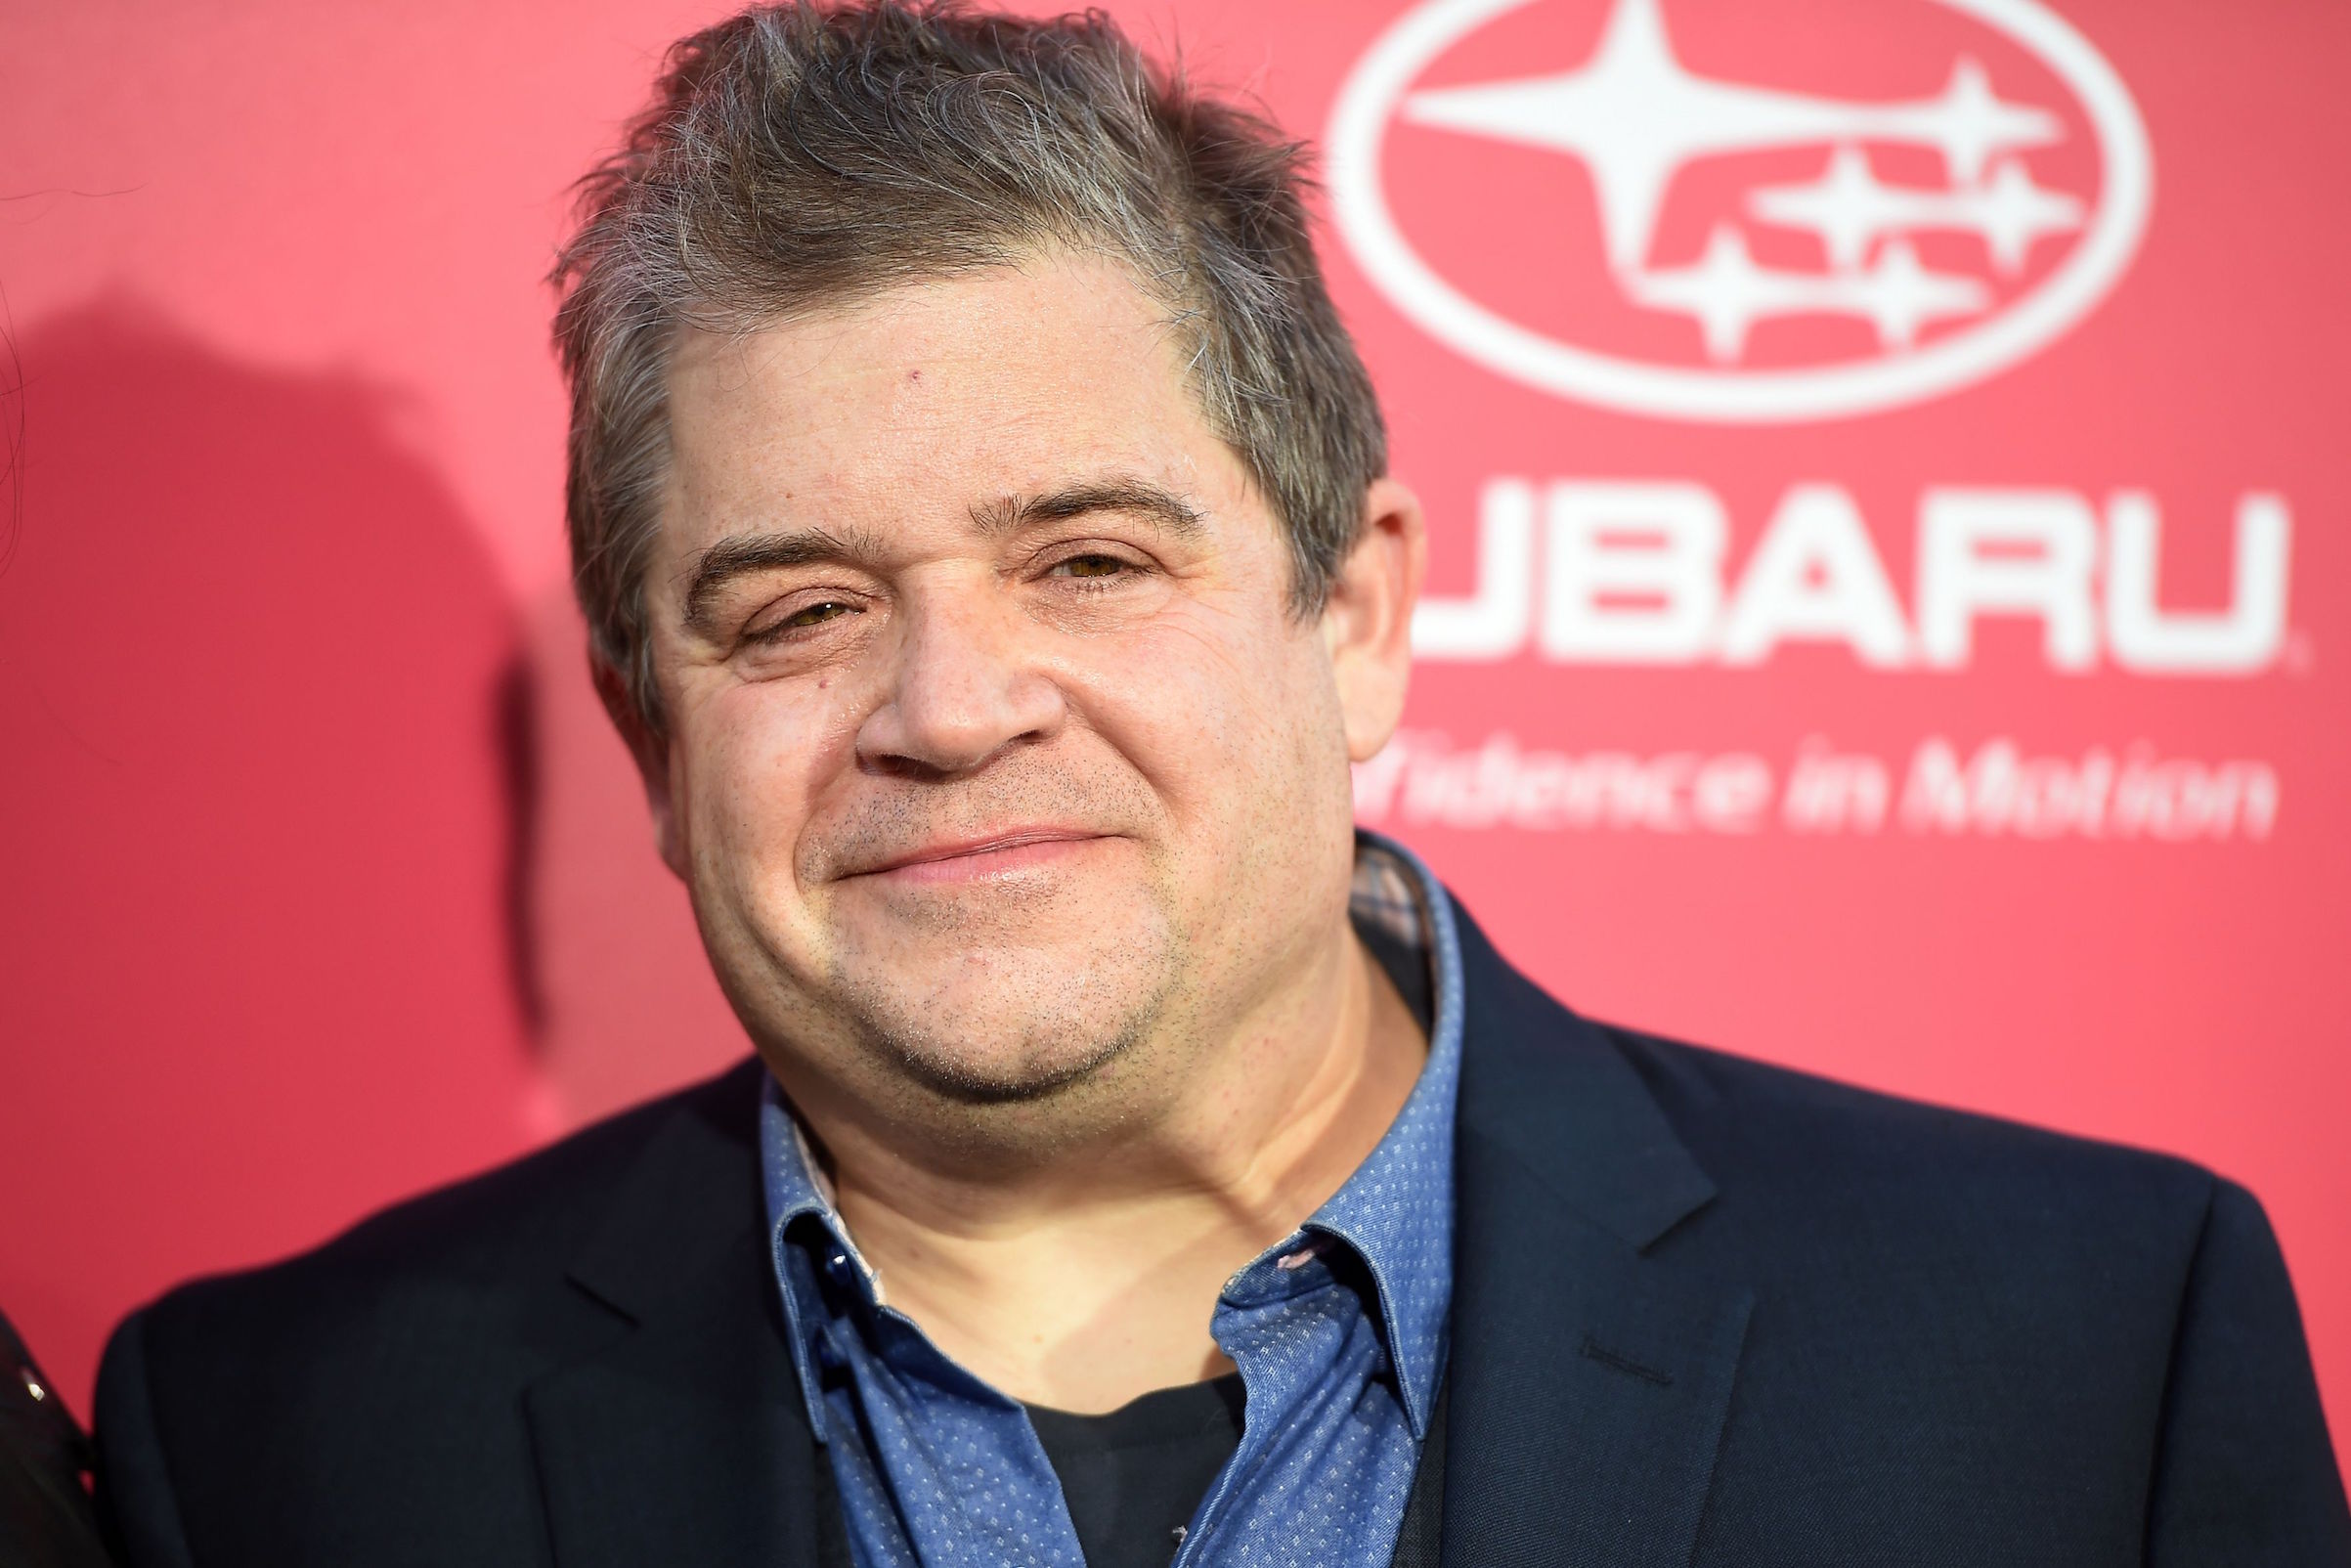 Patton Oswalt attends the premiere of 